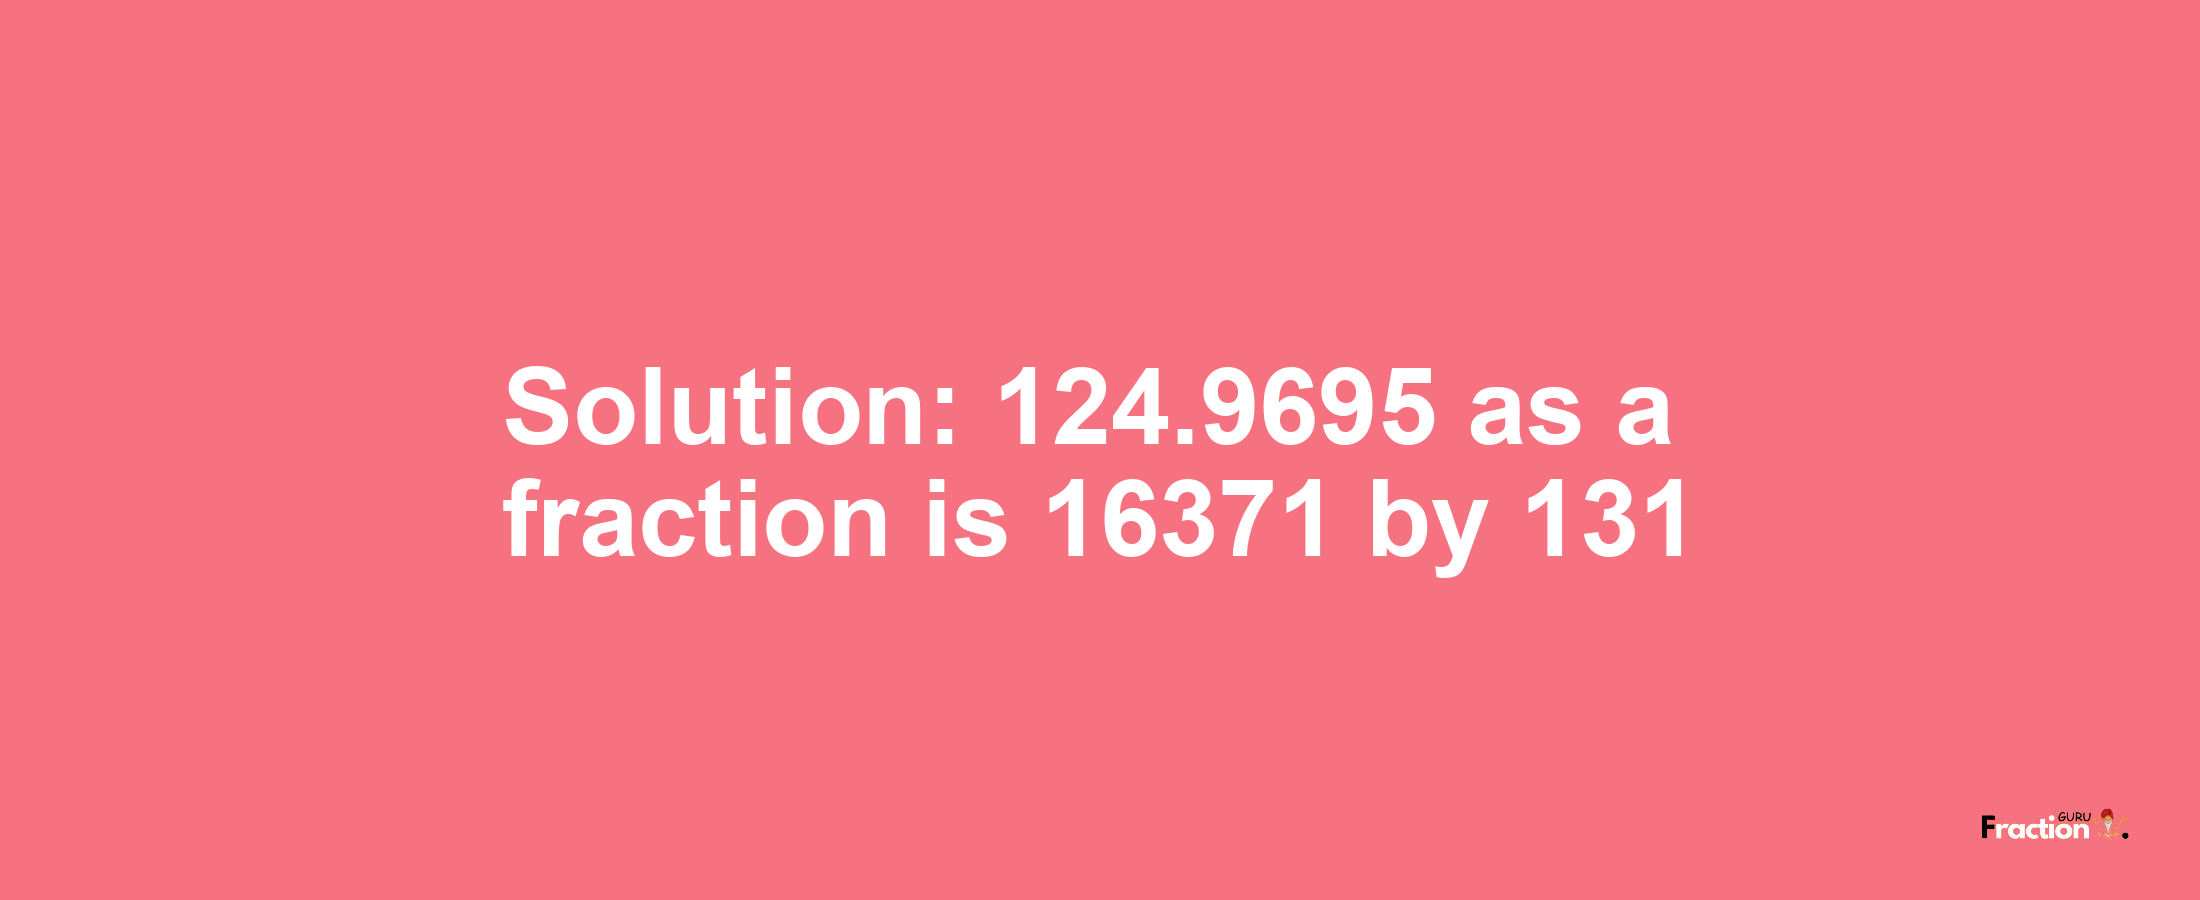 Solution:124.9695 as a fraction is 16371/131